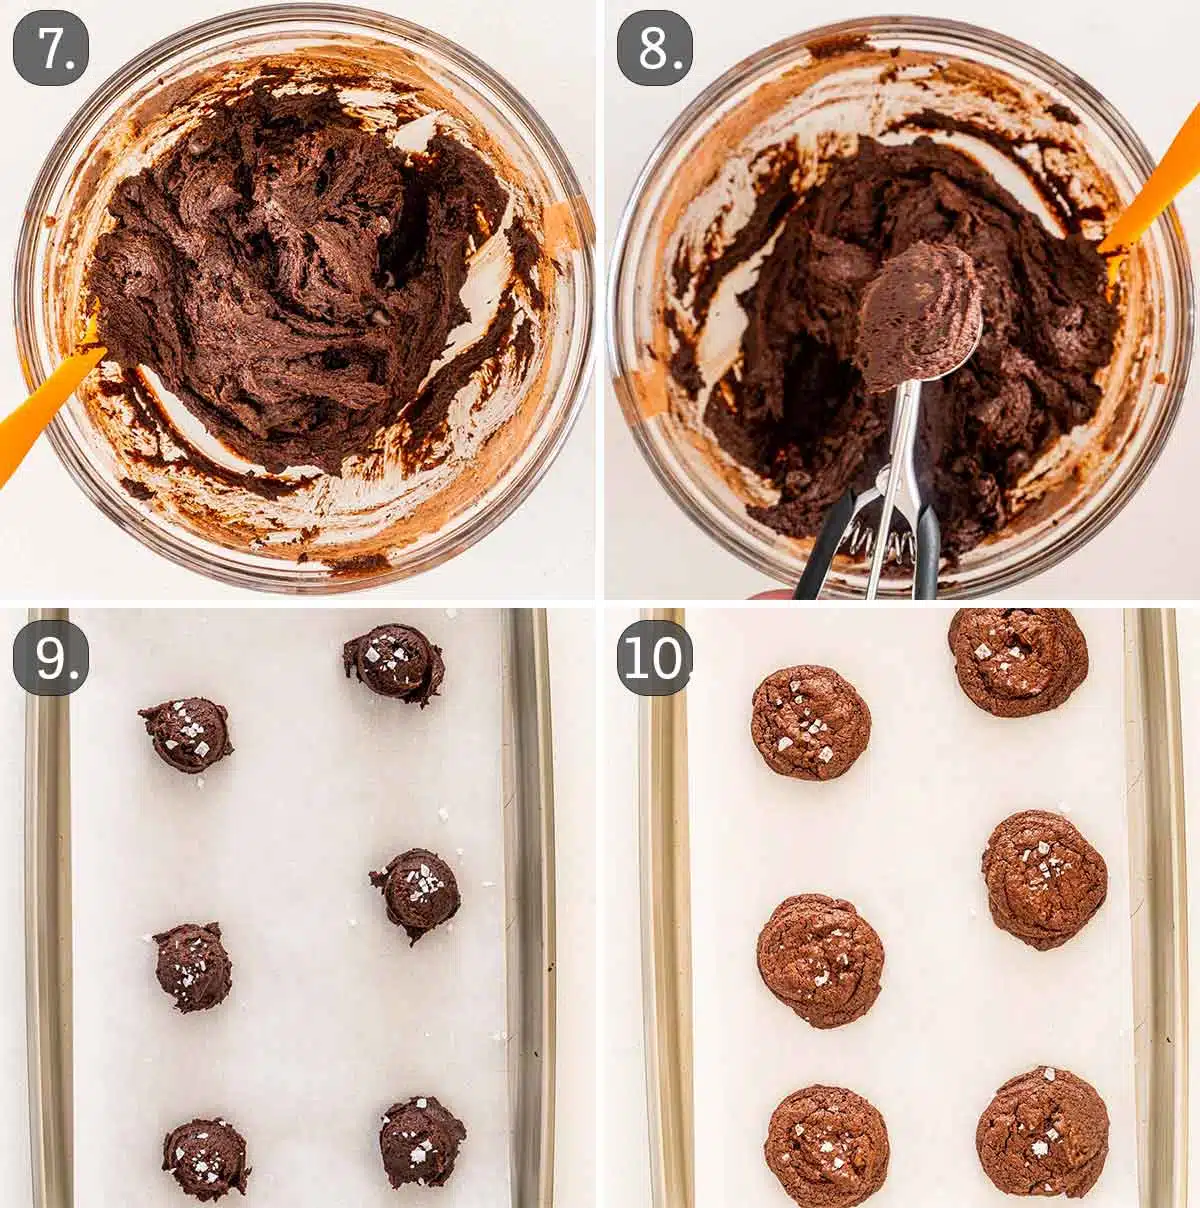 process shots showing how to finish making chocolate brownie cookies.